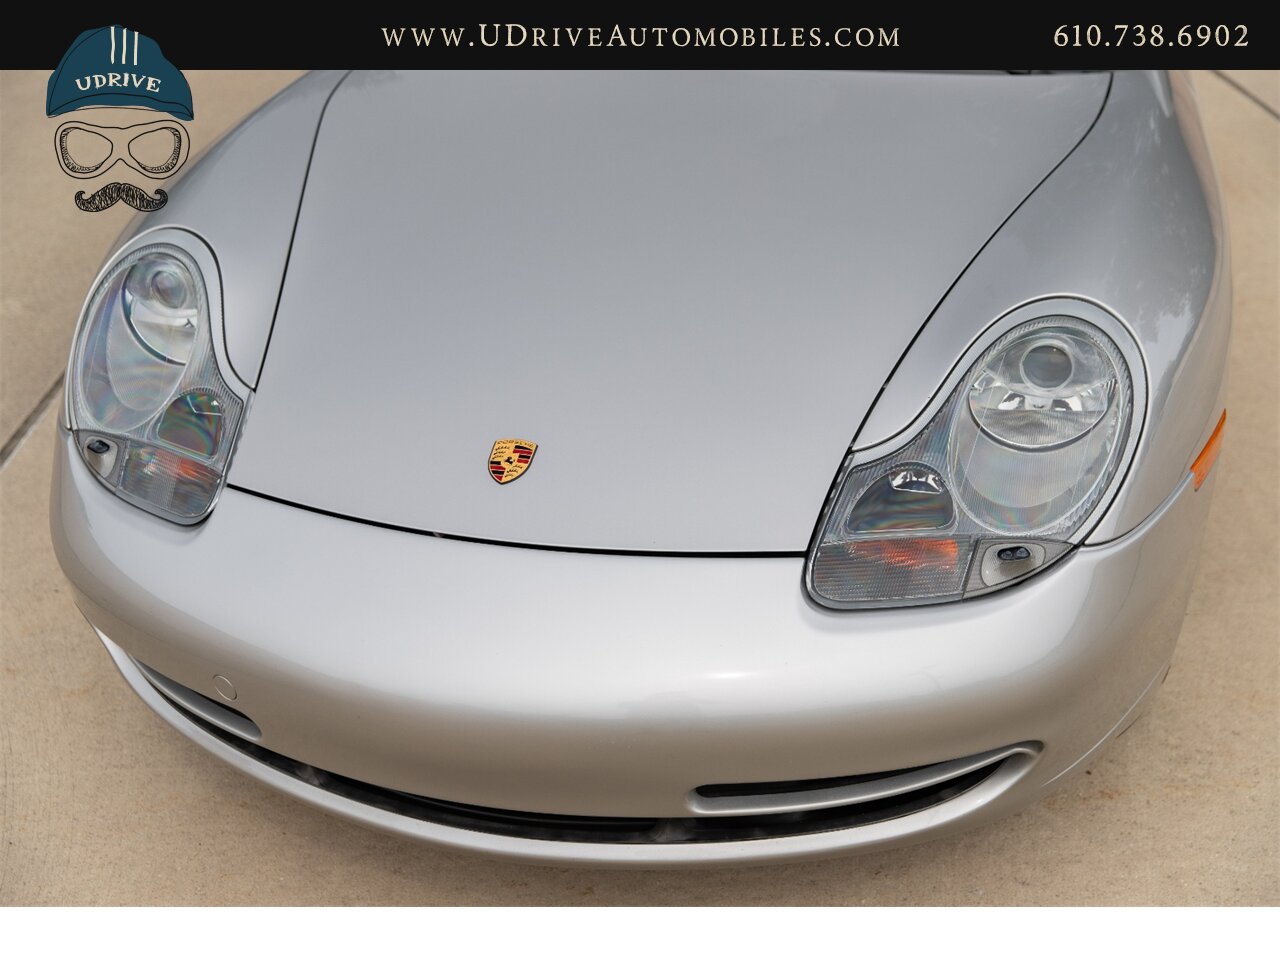 2001 Porsche 911 Carrera 4 Cabriolet Tiptronic IMS Upgrade  Power Seats 18in Turbo Look Wheels 2 Owners $5k Recent Service - Photo 13 - West Chester, PA 19382